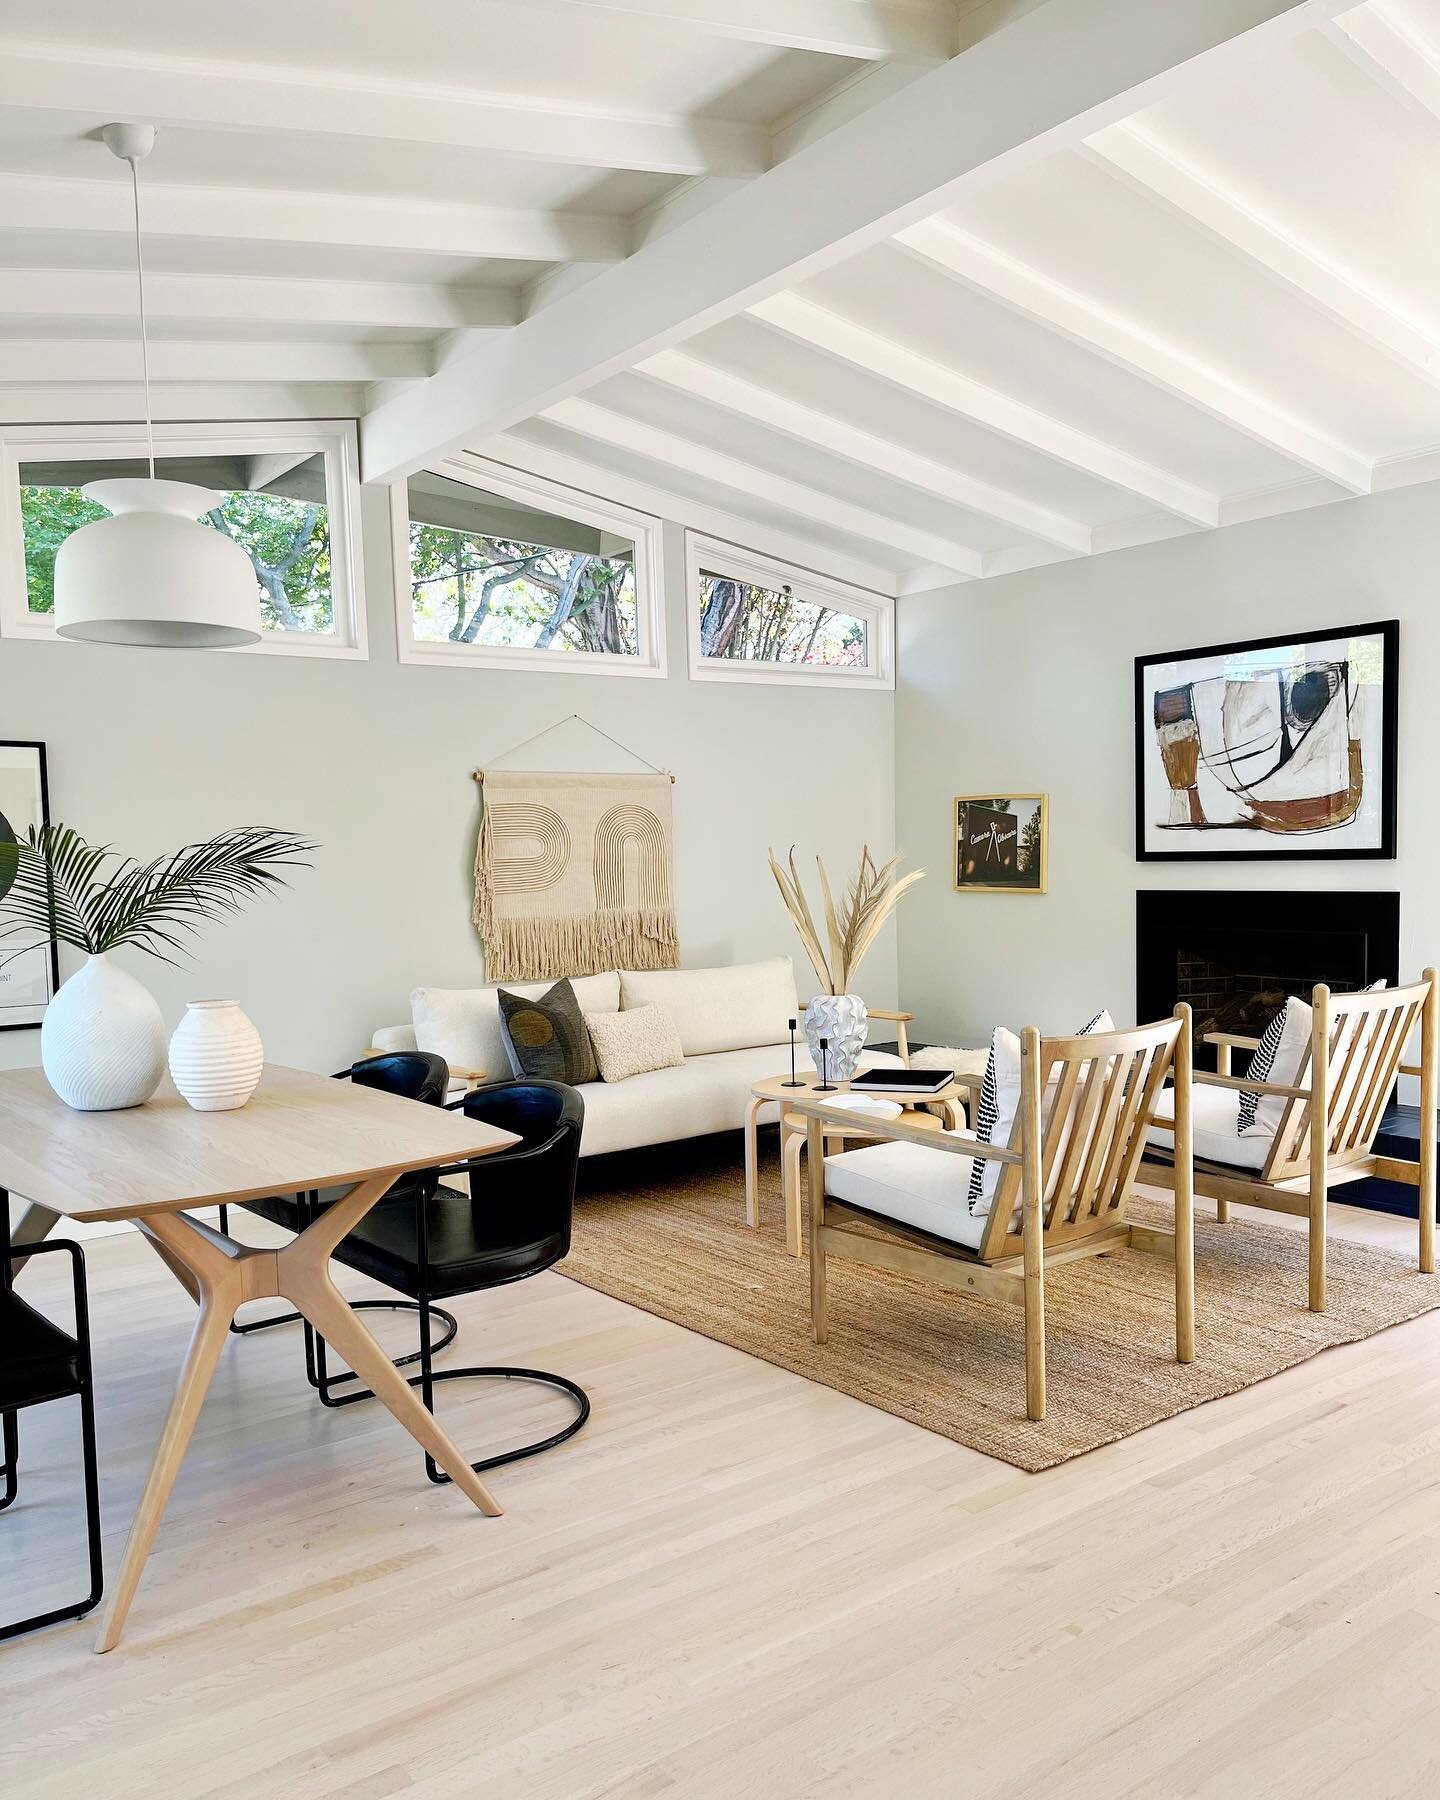 California casual vibes for this mid-century space. Swipe to see the before!
.
.
.
.
#californiacasual #californialiving #bayarearealestate #interiordesign #interiorstyling #designinspo #livingroominspo